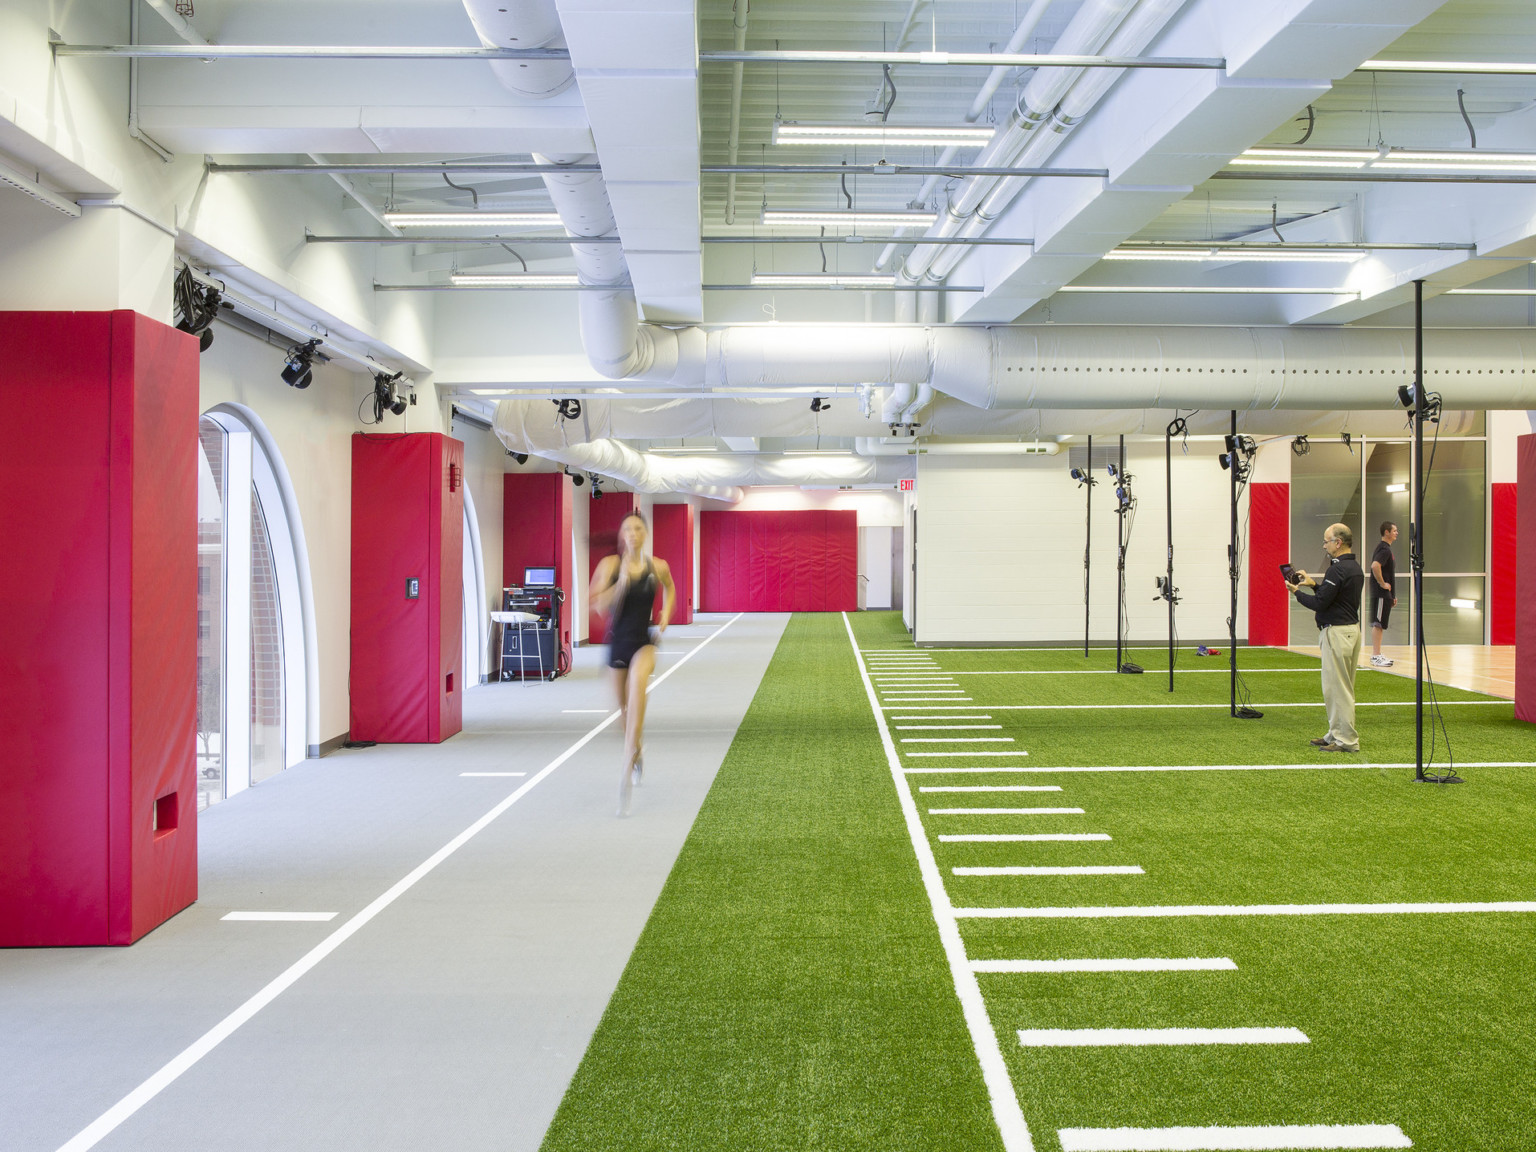 The University of Nebraska Athletic Performance Lab training facility with grey and turf floor in white room with red padding